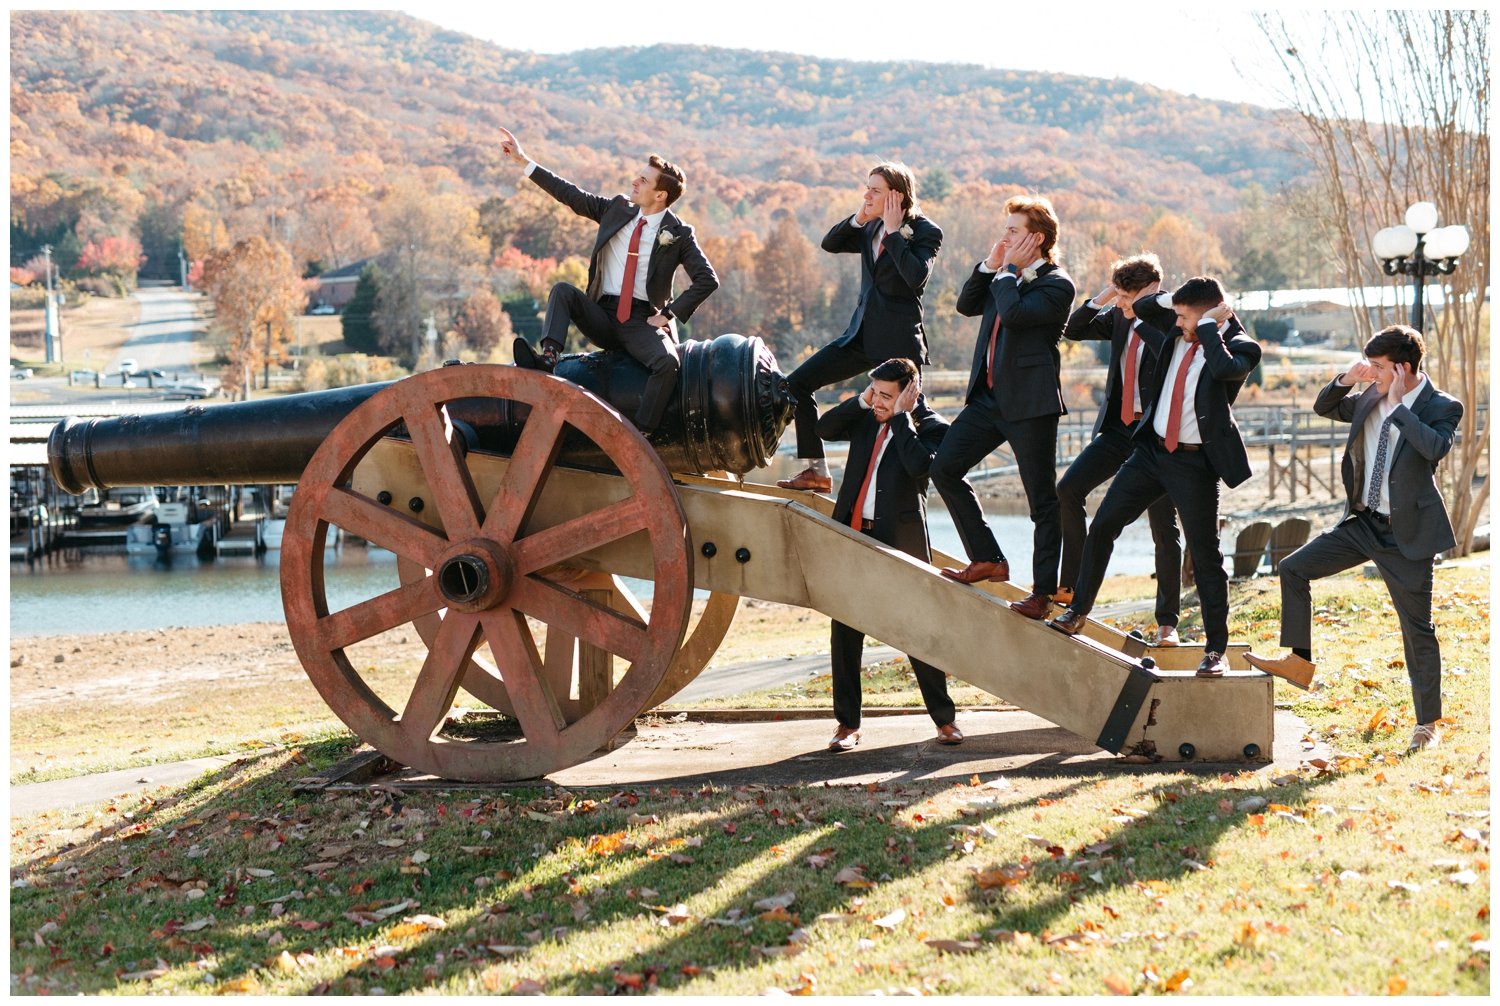 The groom and groomsmen pose on a cannon outside the mountain wedding venue